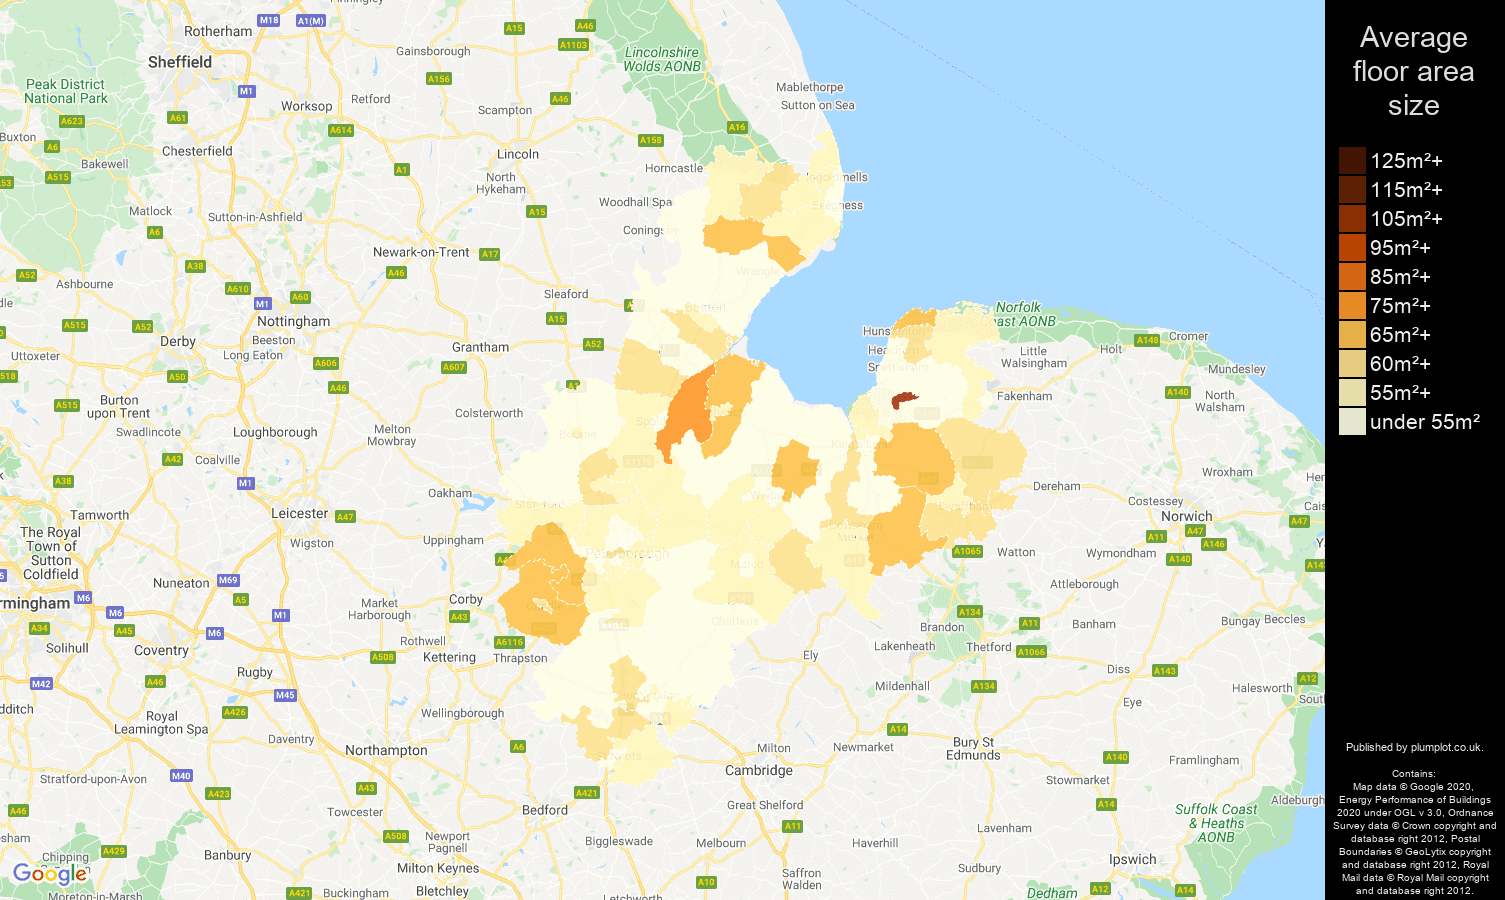 Peterborough map of average floor area size of flats